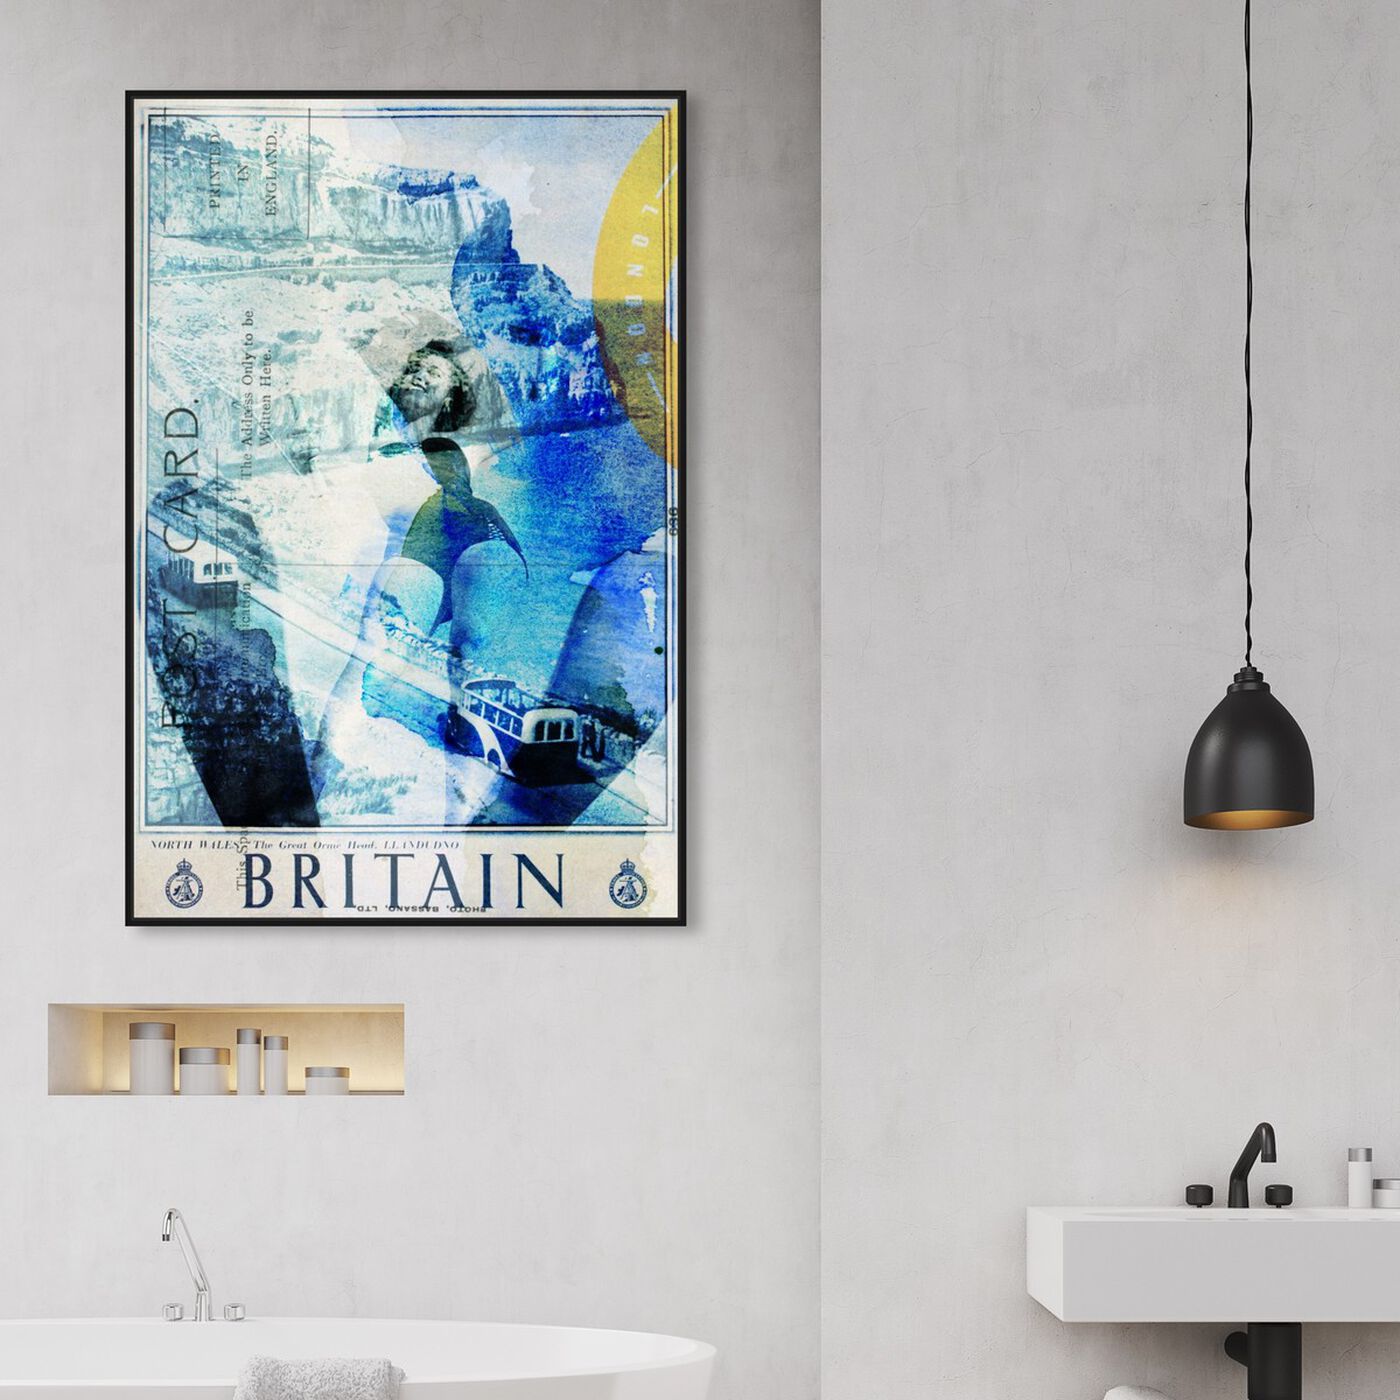 Hanging view of Britain featuring advertising and posters art.